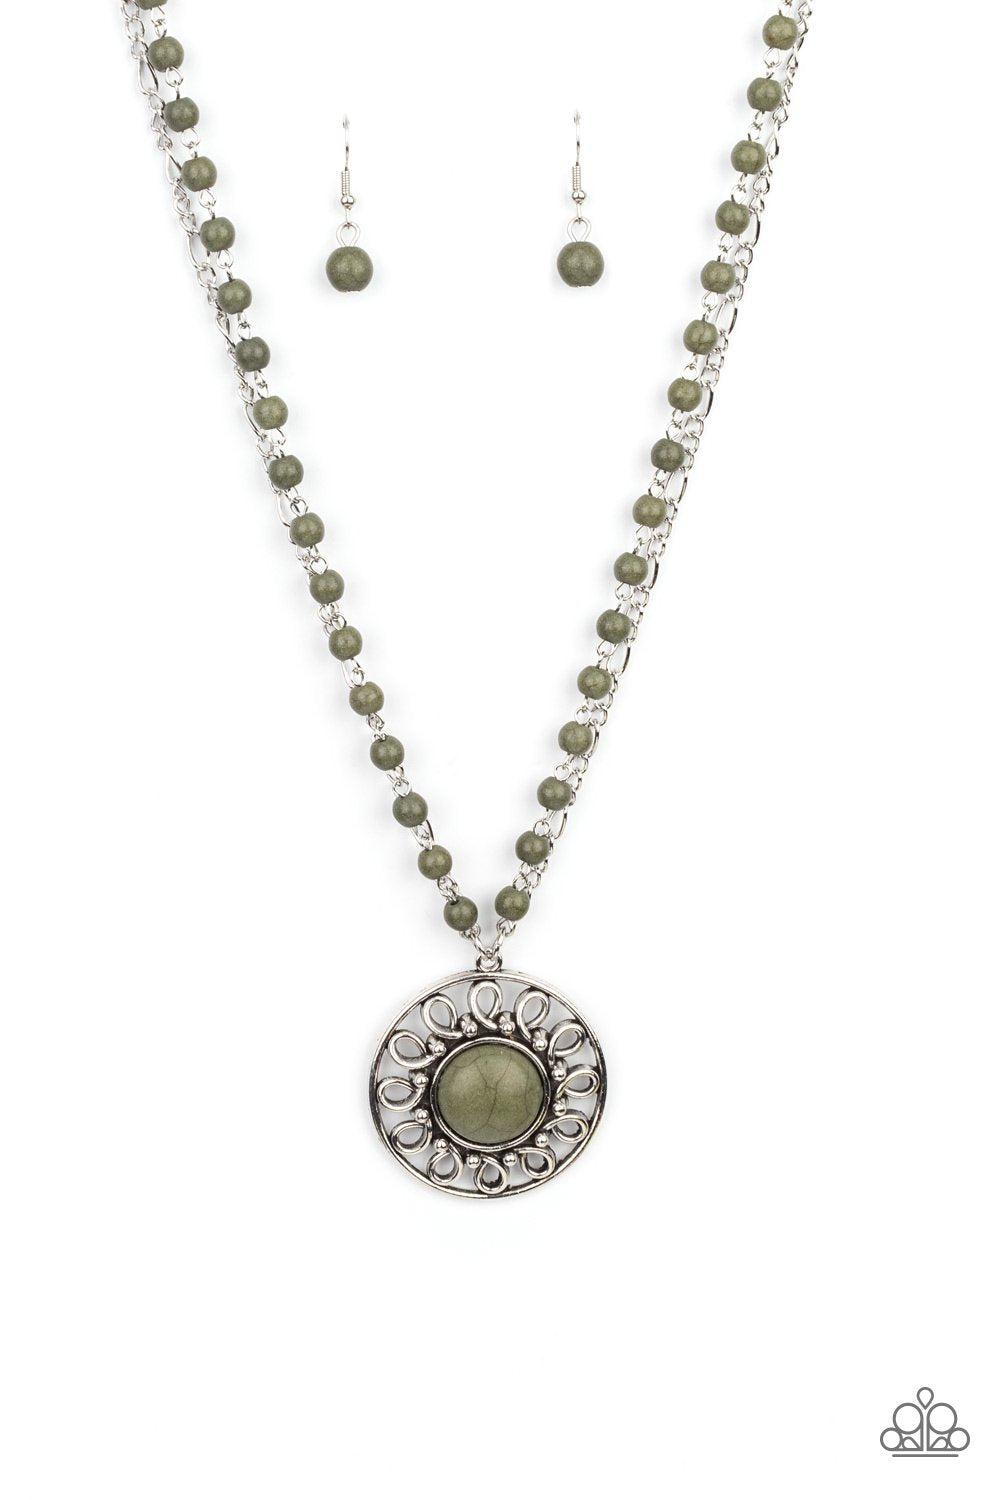 Sahara Suburb Green Stone Necklace - Paparazzi Accessories 2021 Convention Exclusive- lightbox - CarasShop.com - $5 Jewelry by Cara Jewels